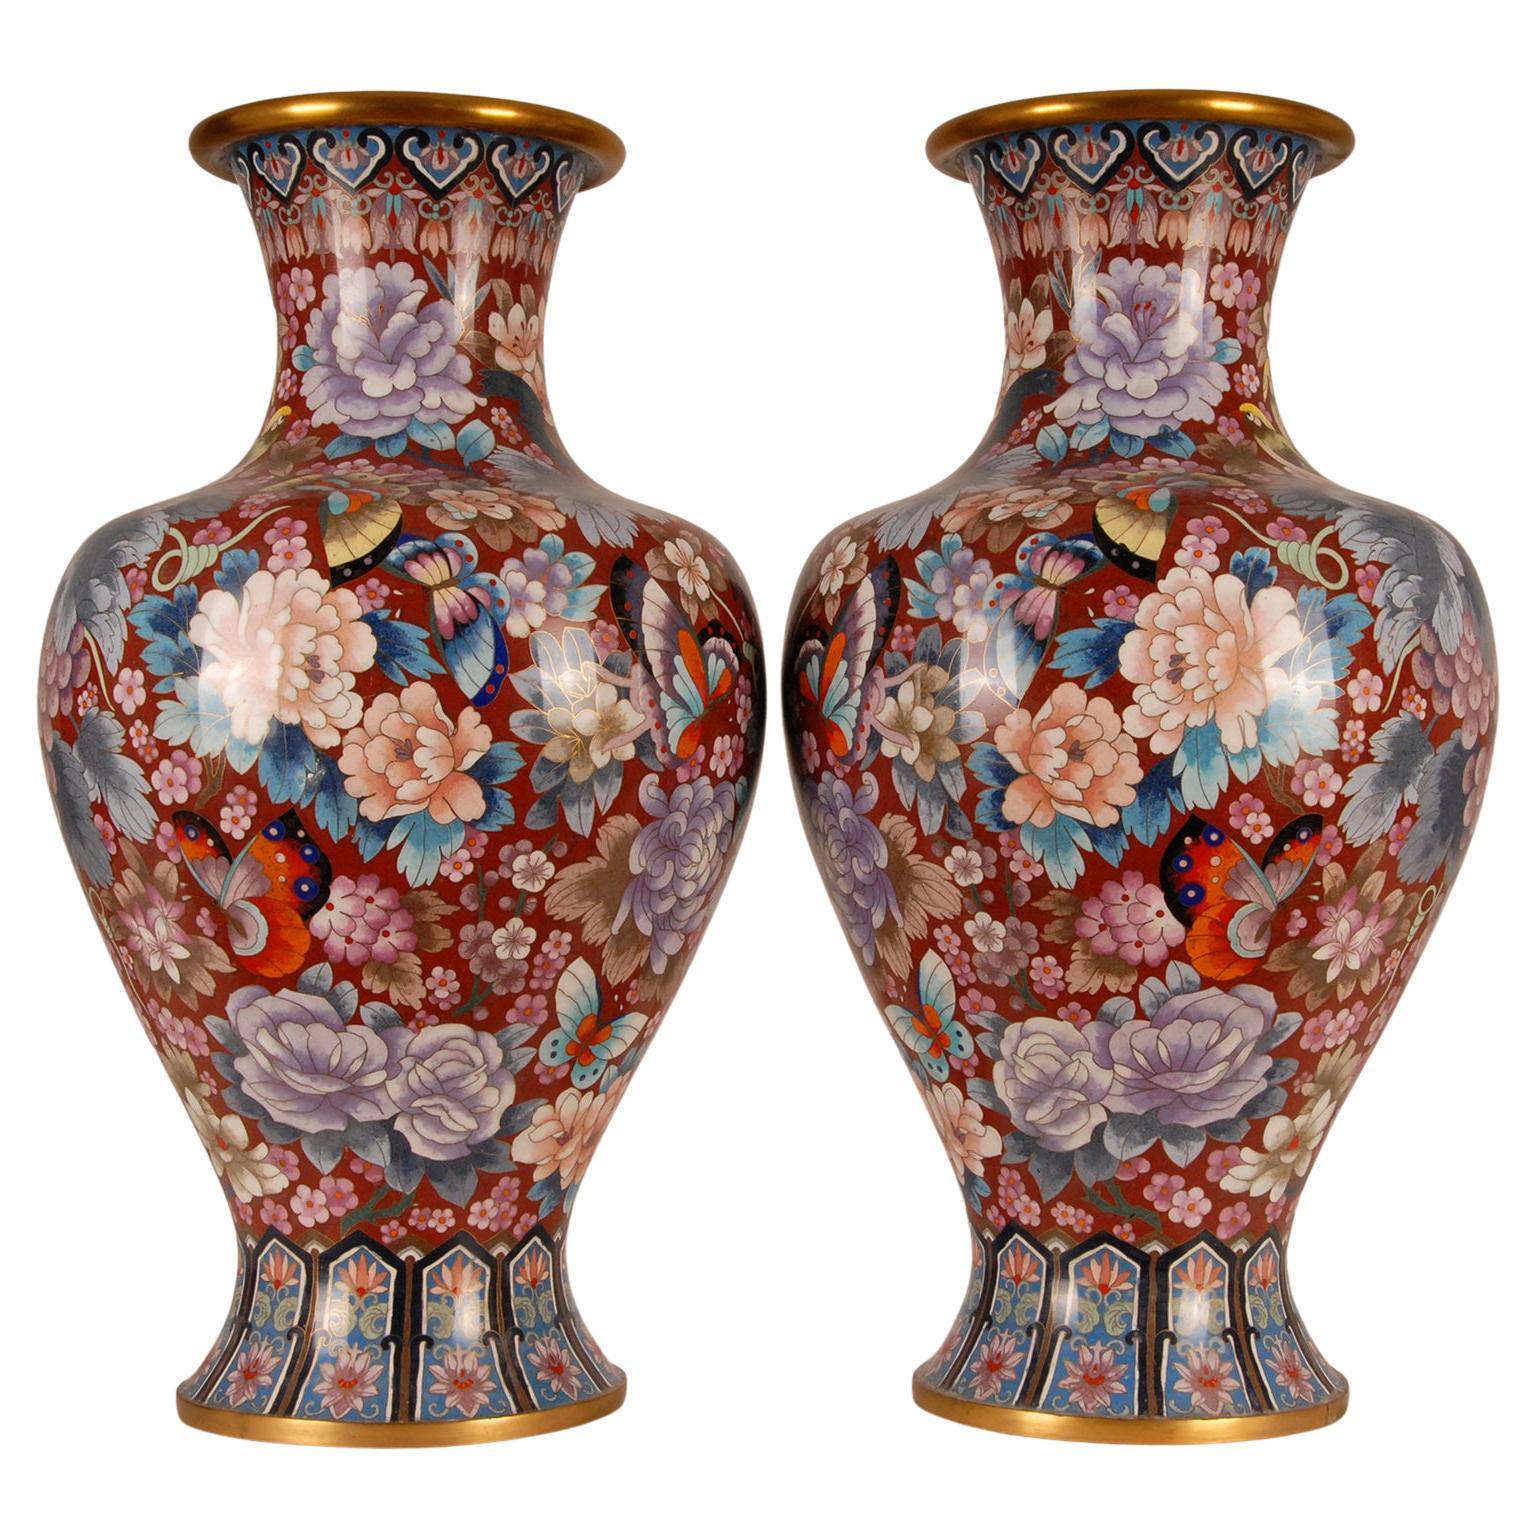 Chinese Cloisonne Gilded Bronze Baluster Vases Enameled Republic Vases a Pair For Sale